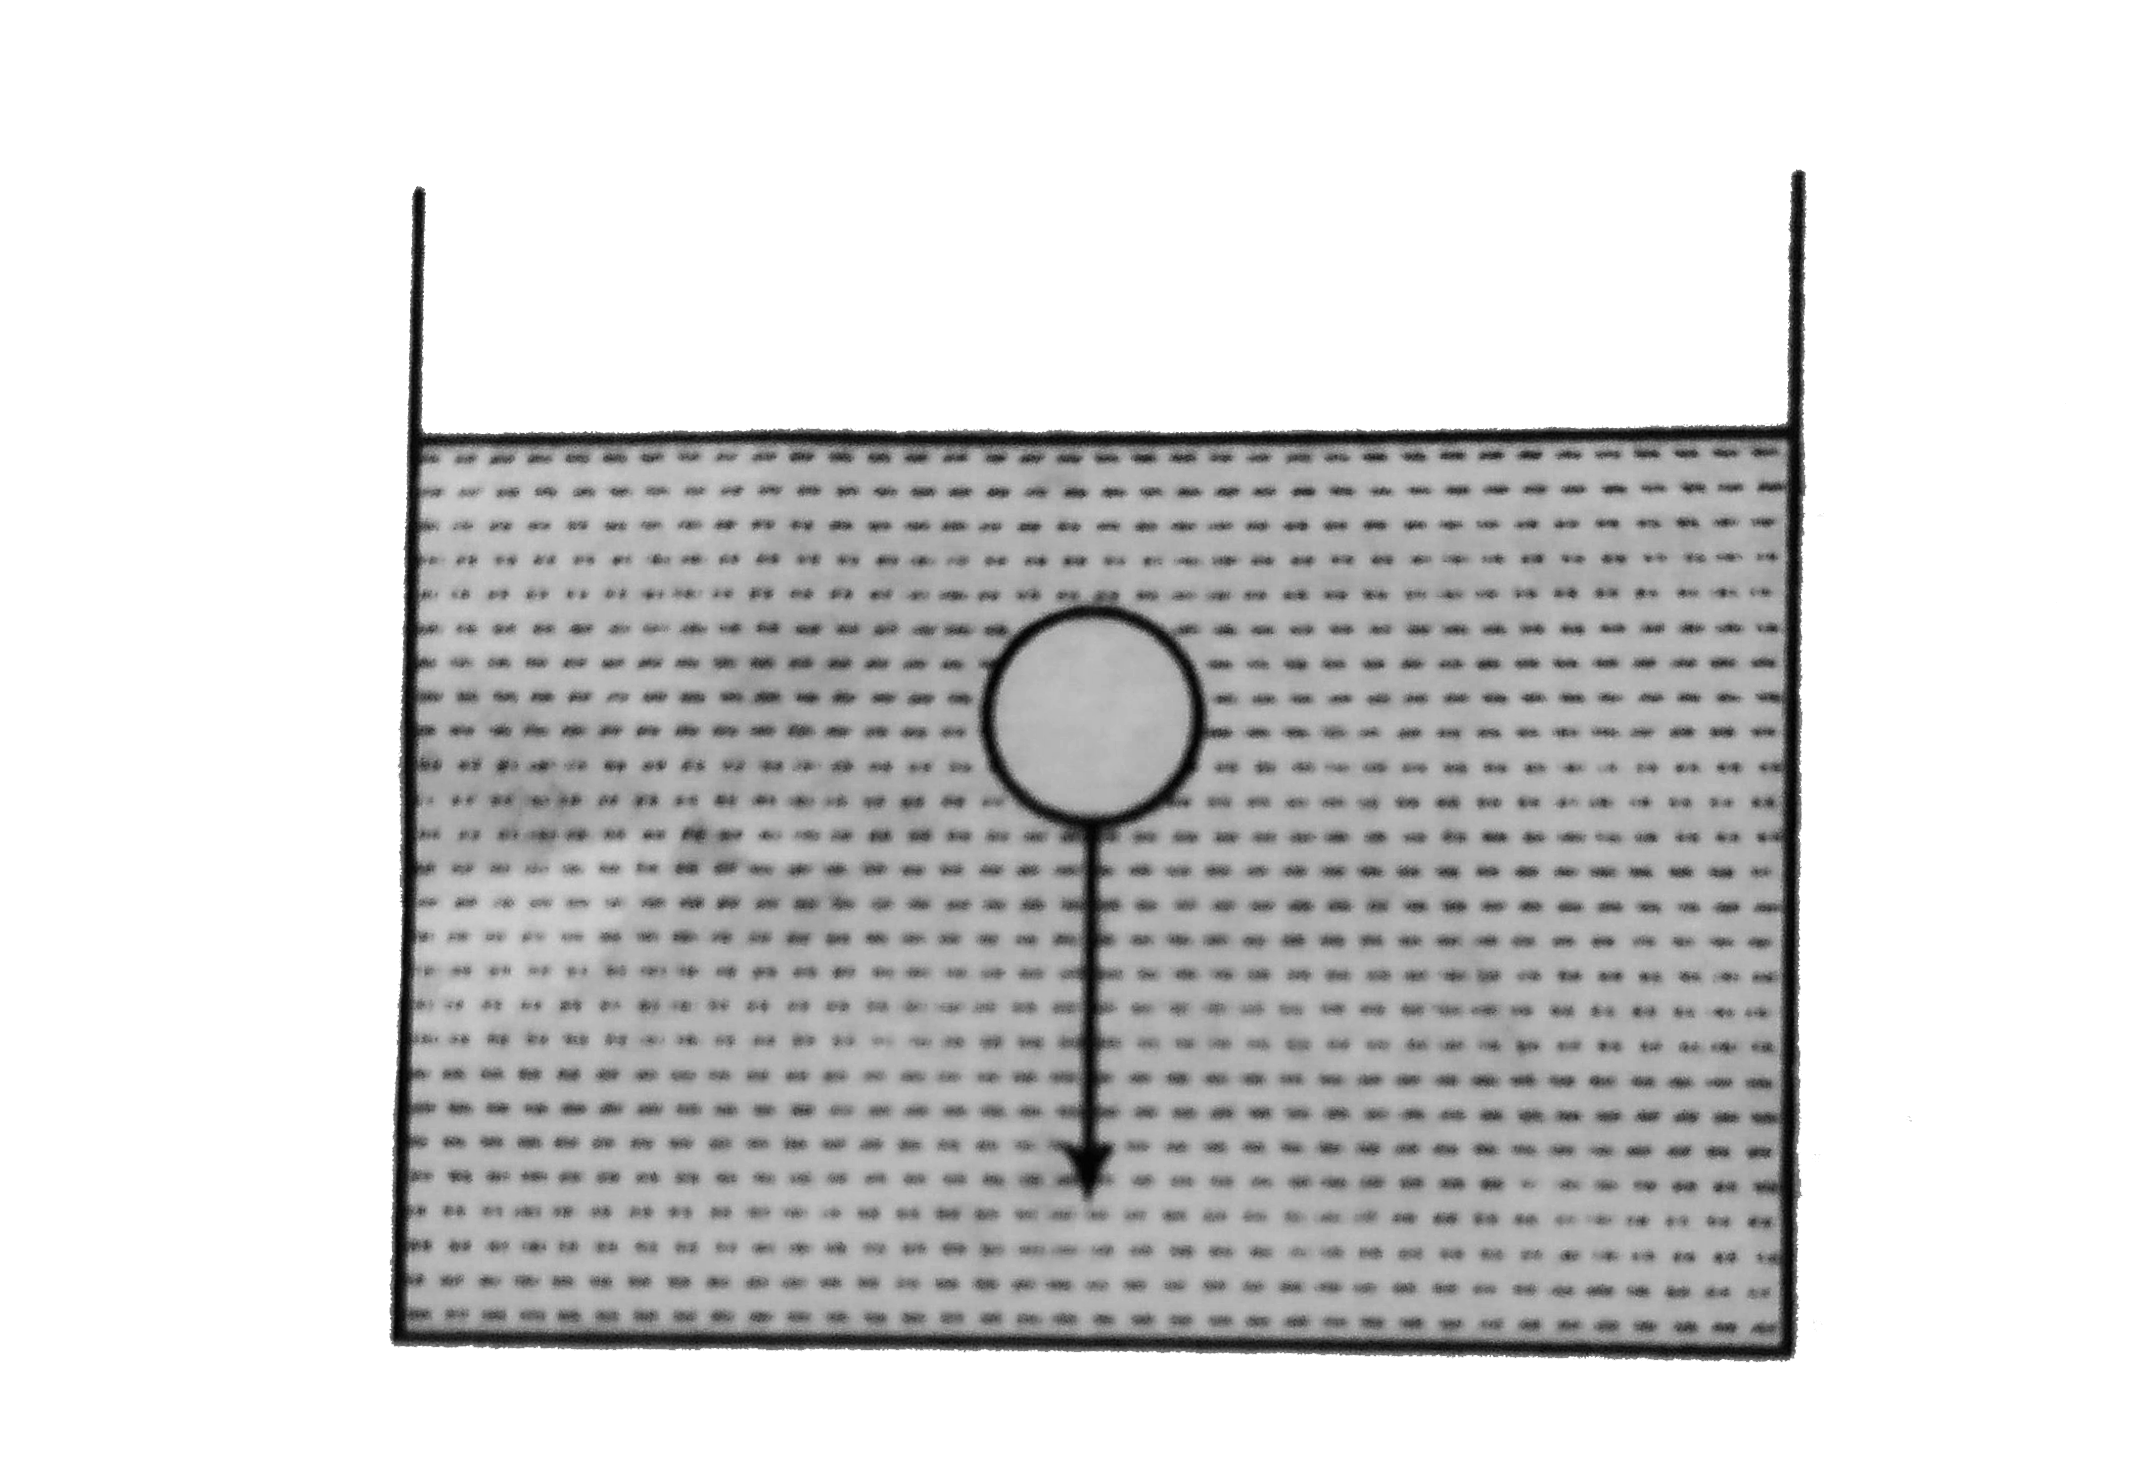 A ball of volume V and density rho(1) is moved downwards by a distance 'd' in liquid of density rho(2). Find total change in potential energy of the system.